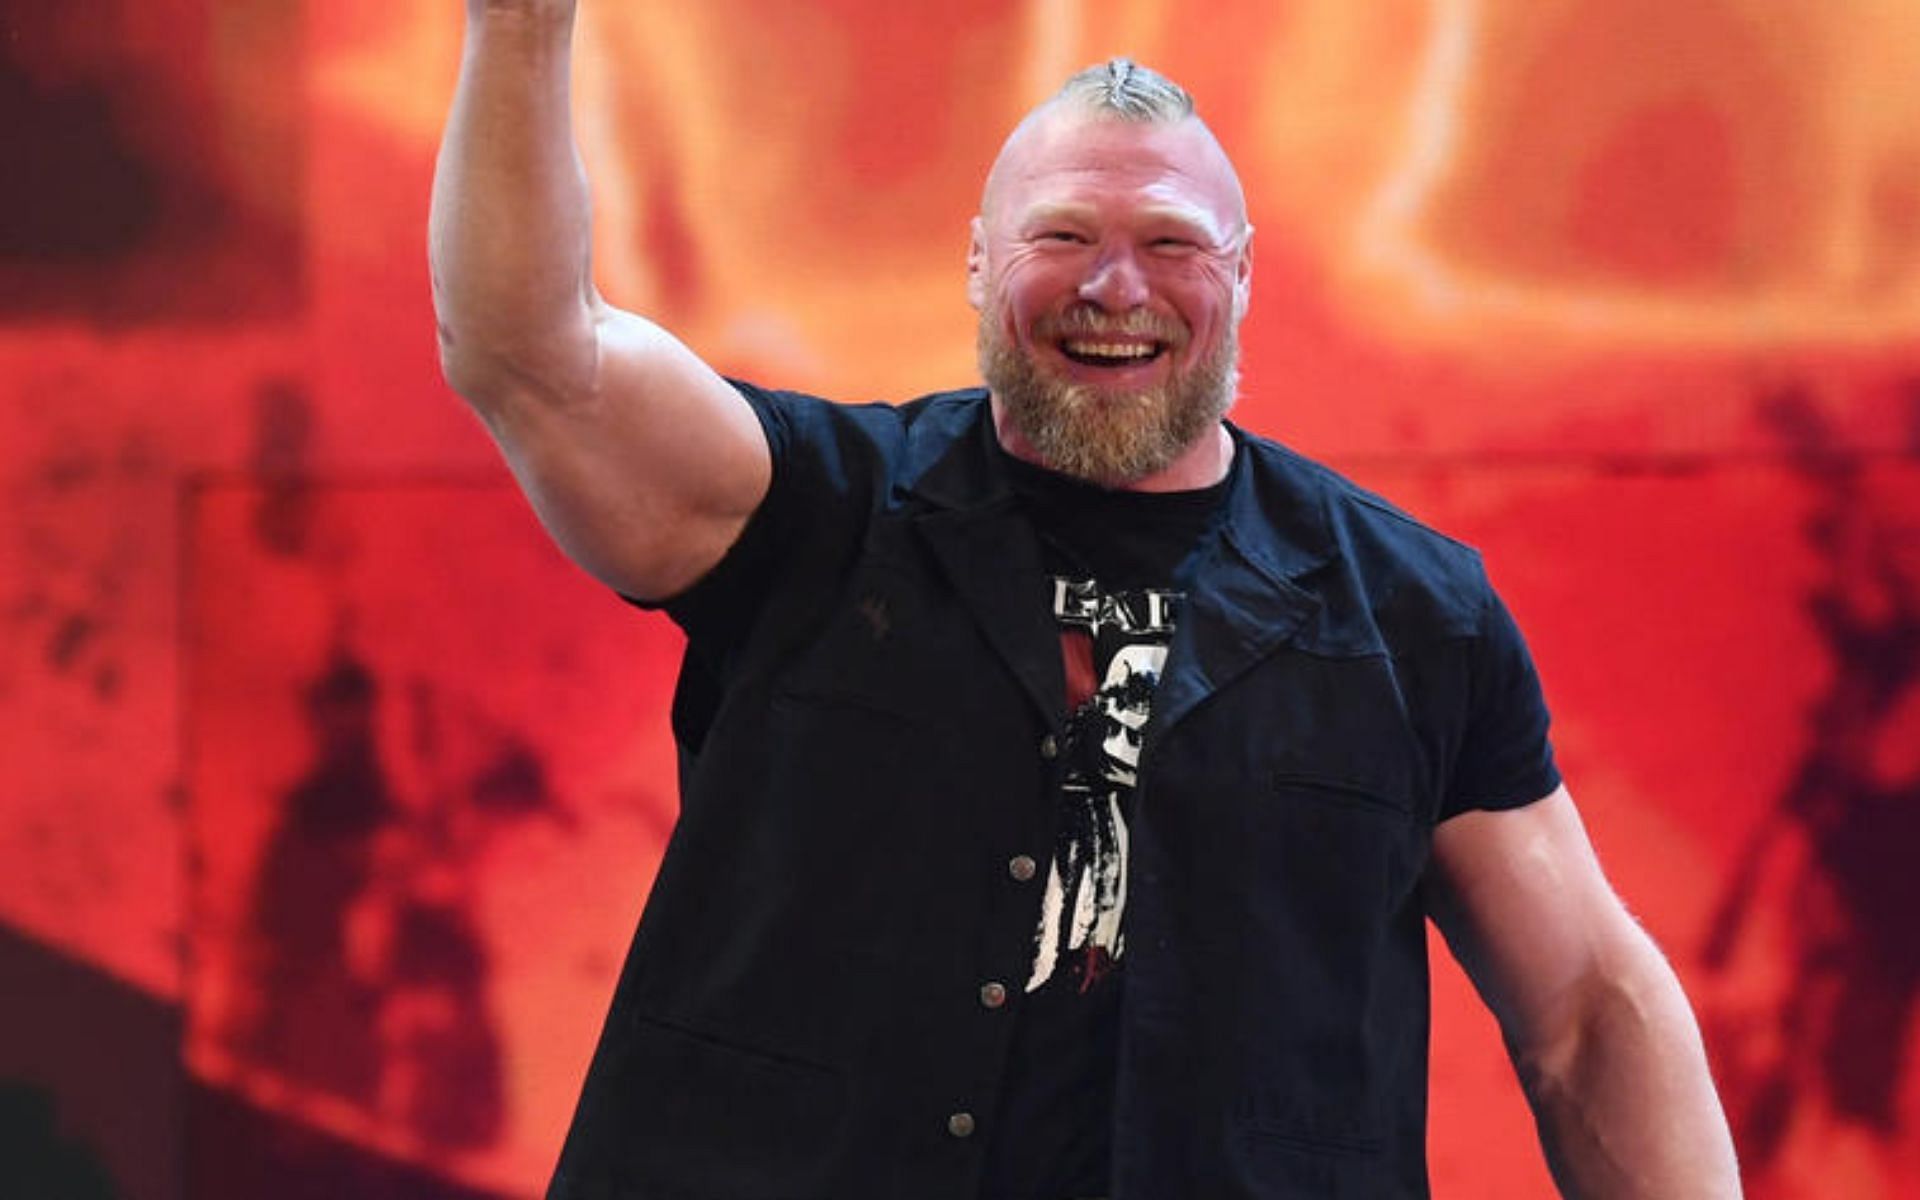 The Beast Incarnate has a darker new look after turning heel